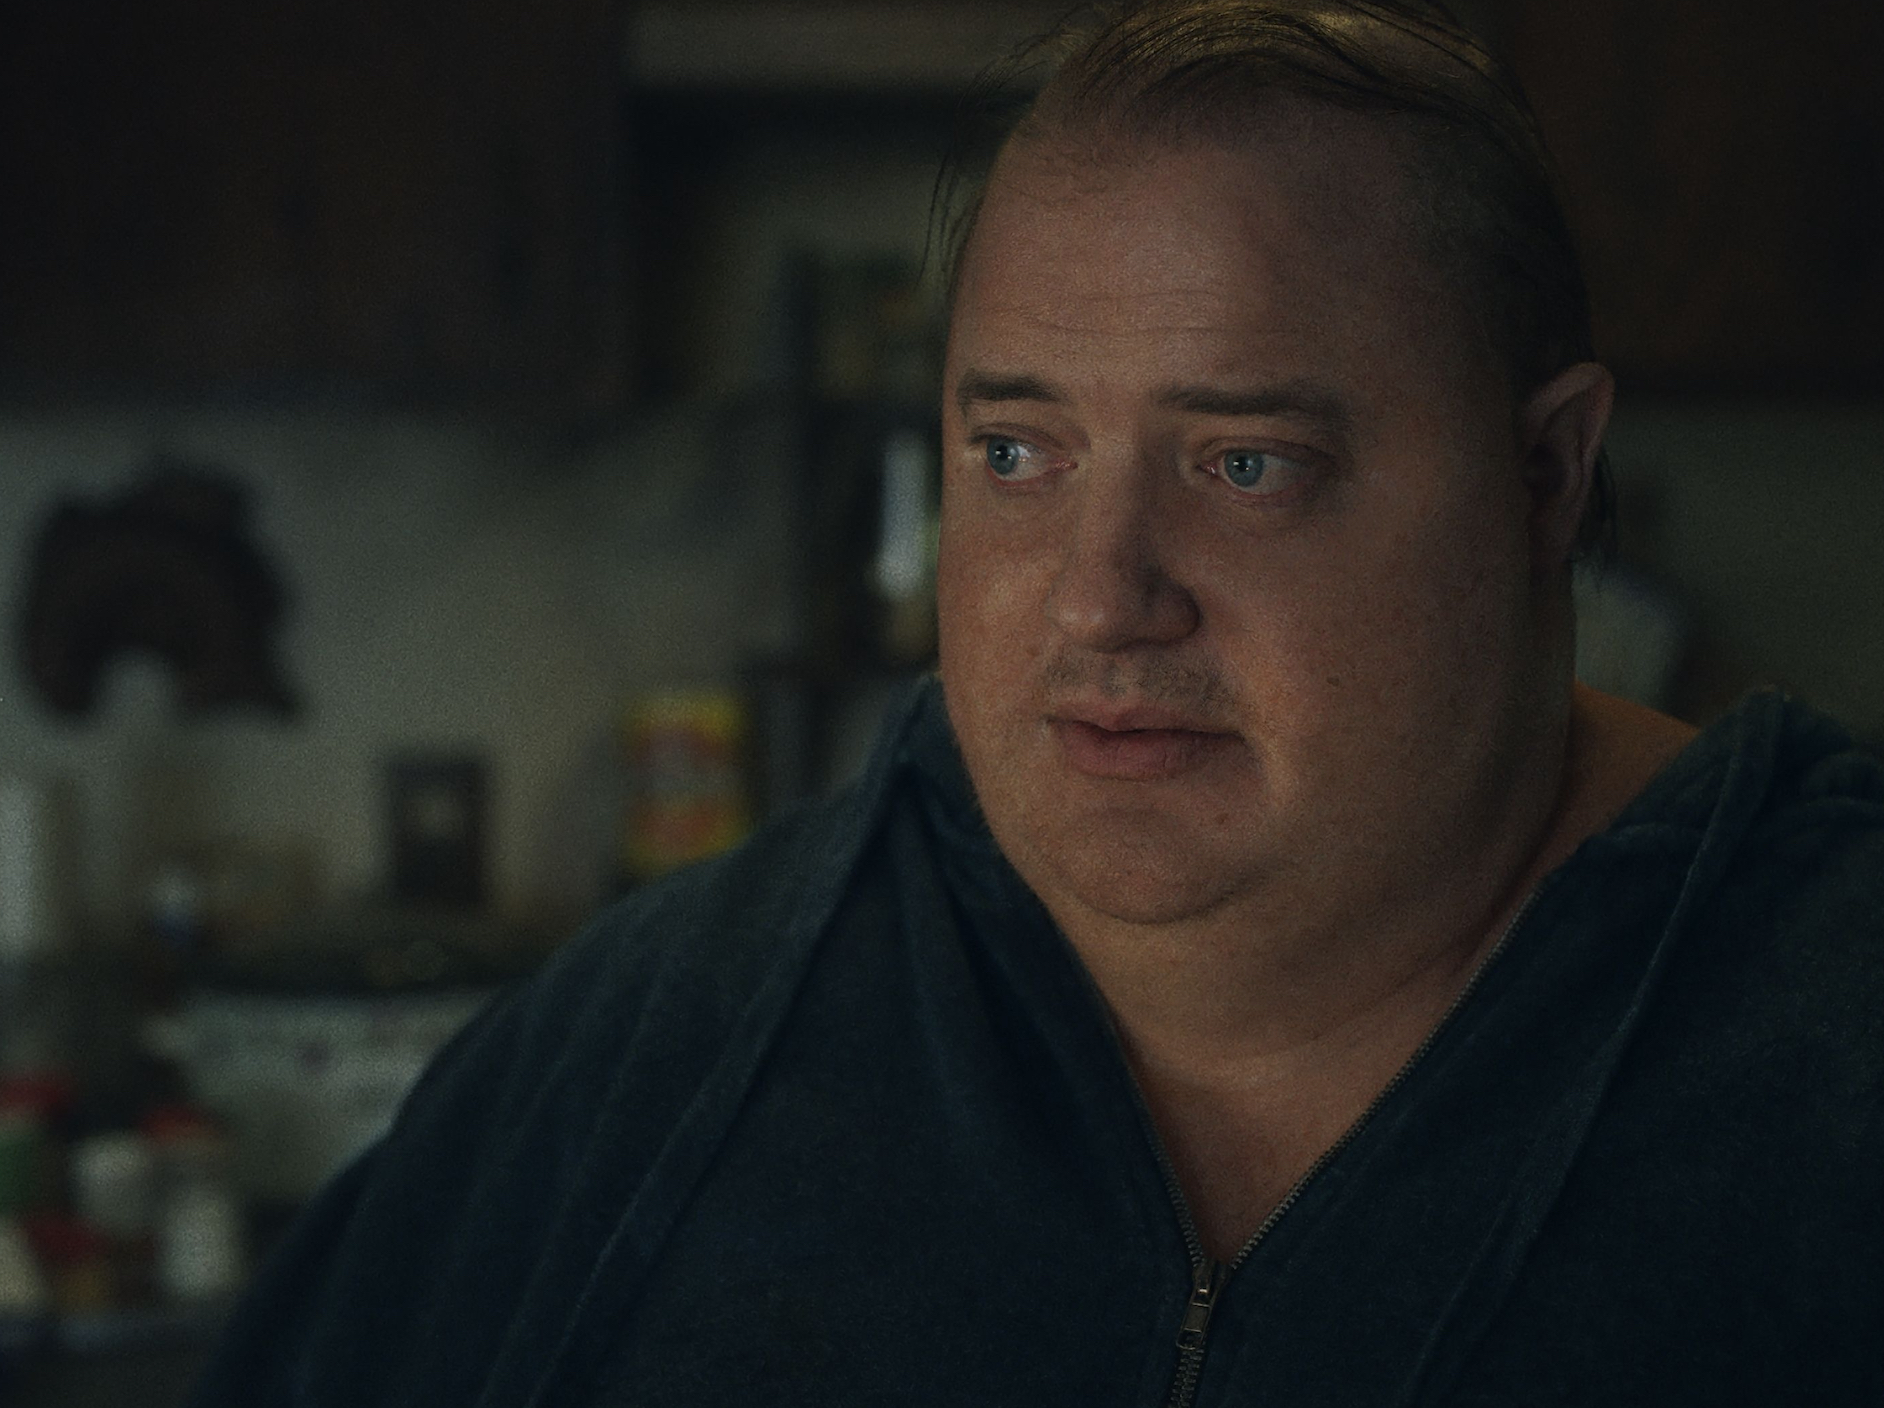 Actor Brendan Fraser in character as The Whale, a 600-pound man, looks off camera with a pained expression on his face.